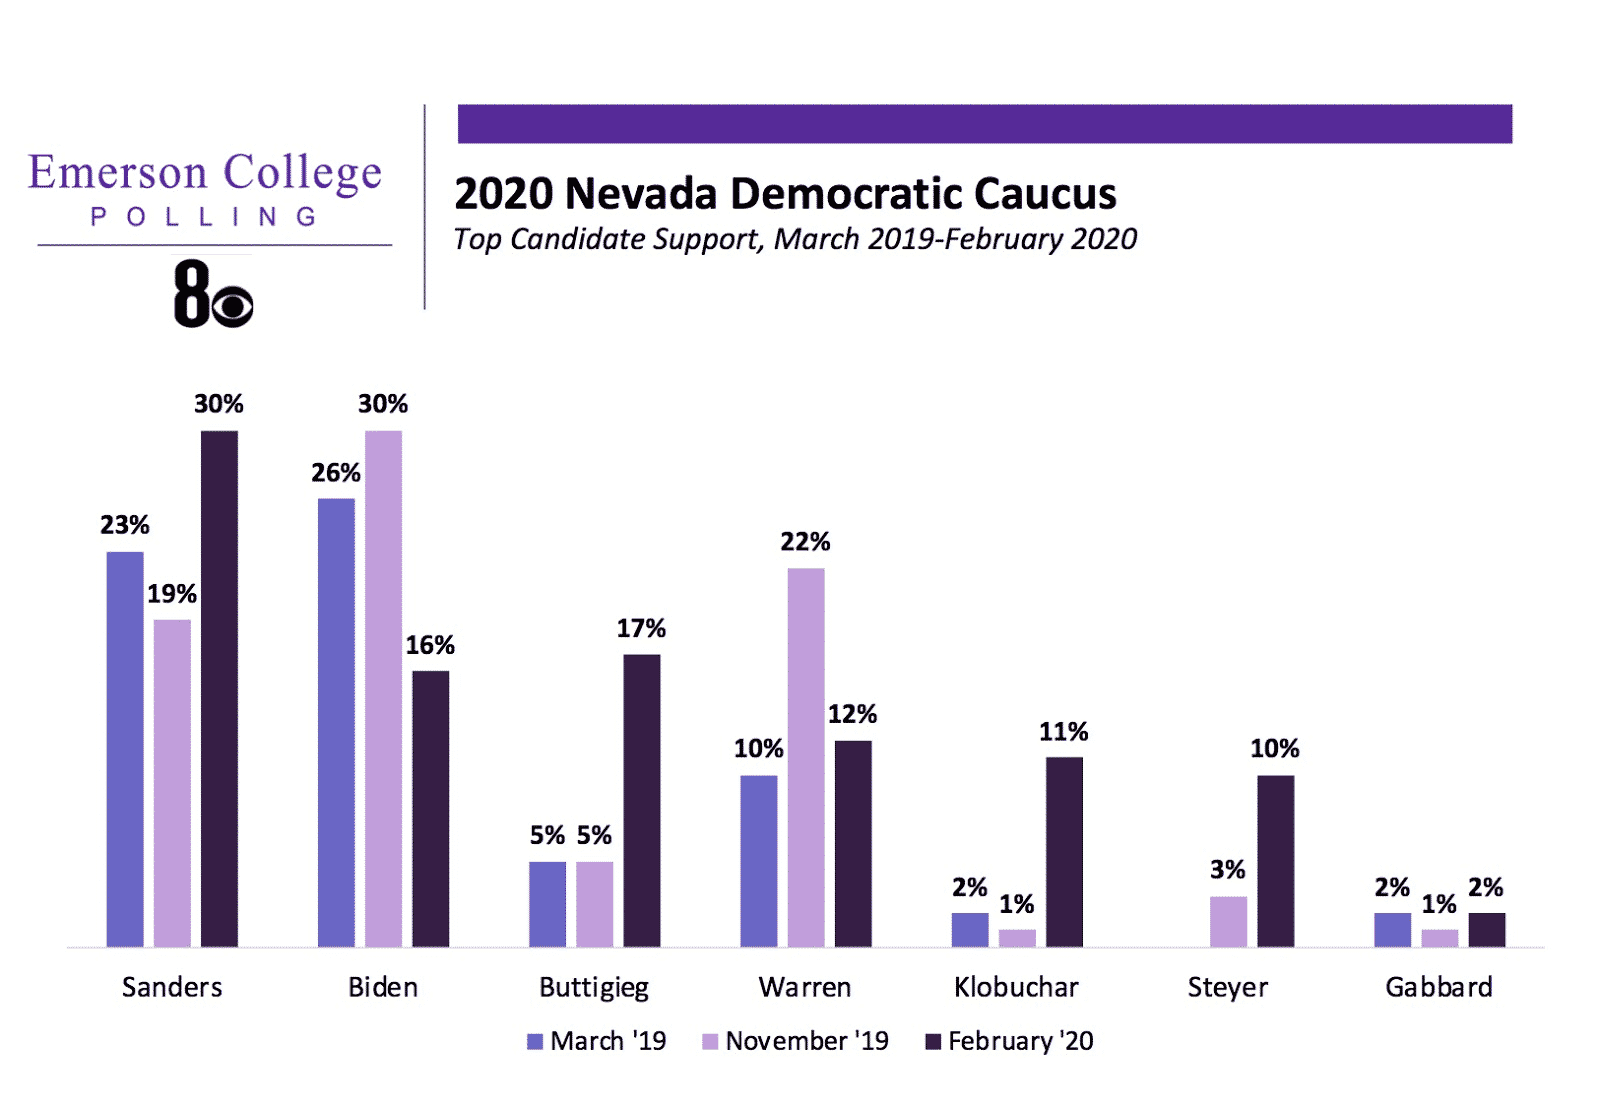 Nevada 2020: Sanders with Comfortable Lead Heading into Caucus, Tight Race for Second Place